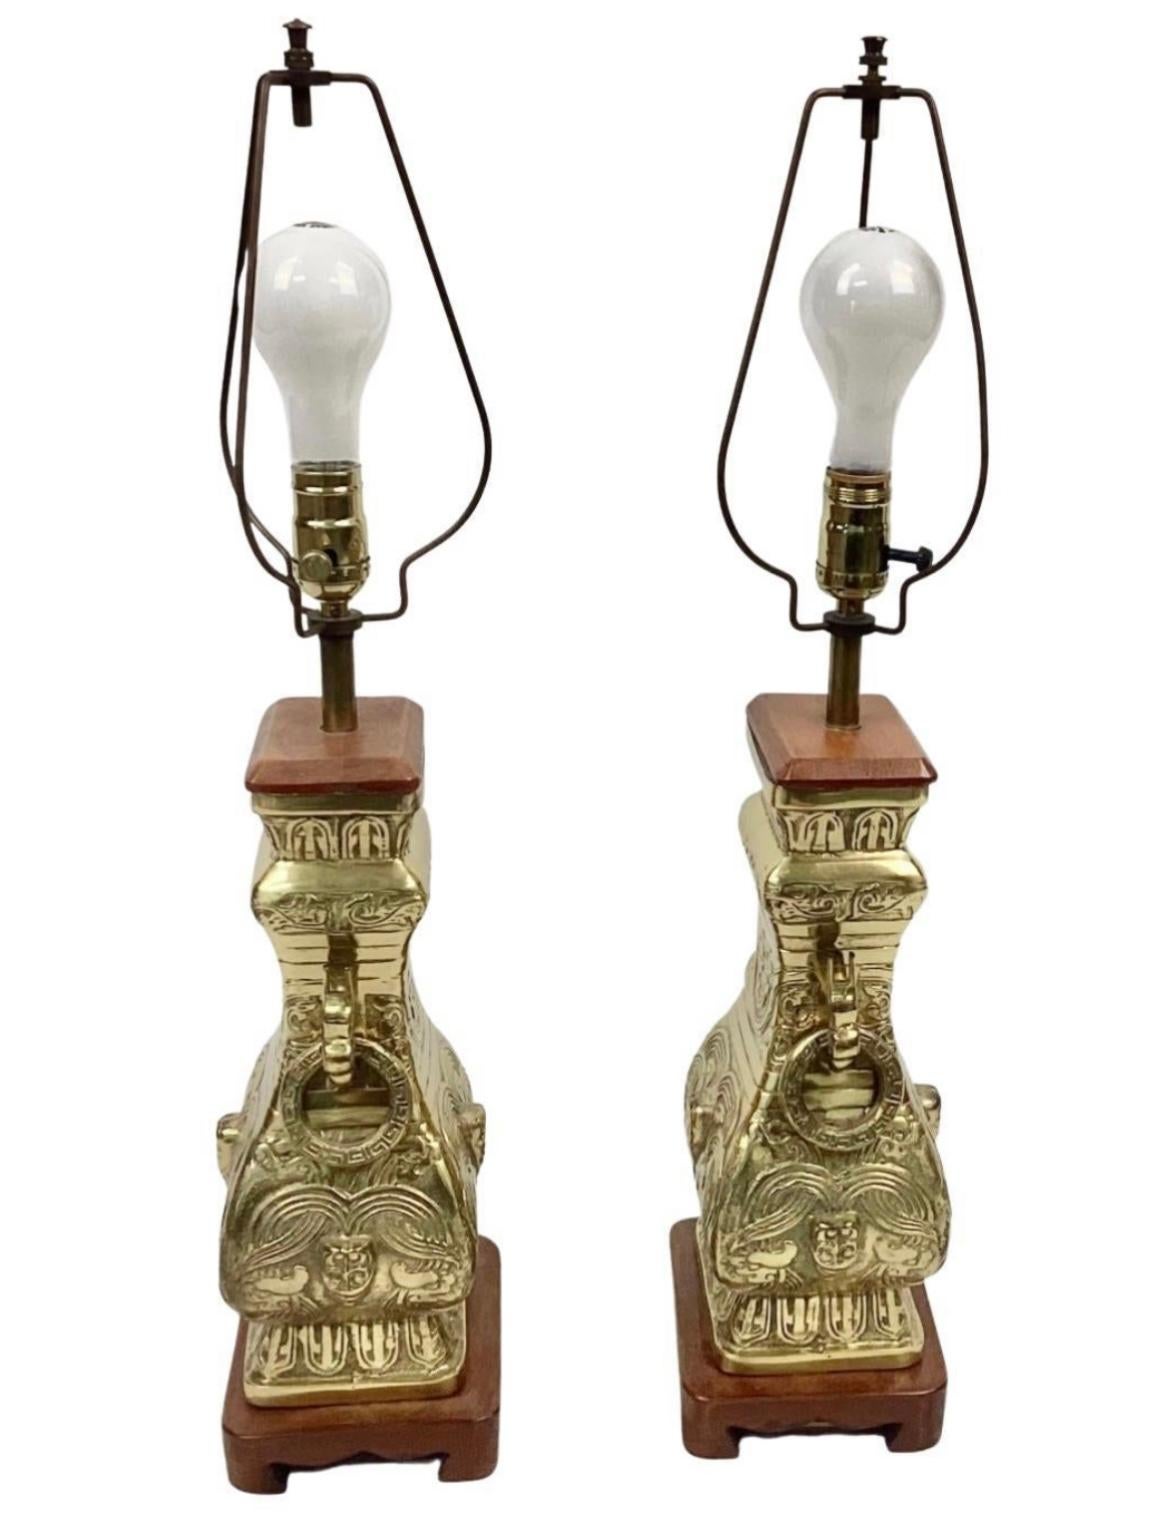 Pair of impressive 20th century chinoiserie brass table lamps in the style of James Mont. Solid brass with a wooden base and cap. Ornate brass rings hang from either side of lamps.

Dimensions:
26.5